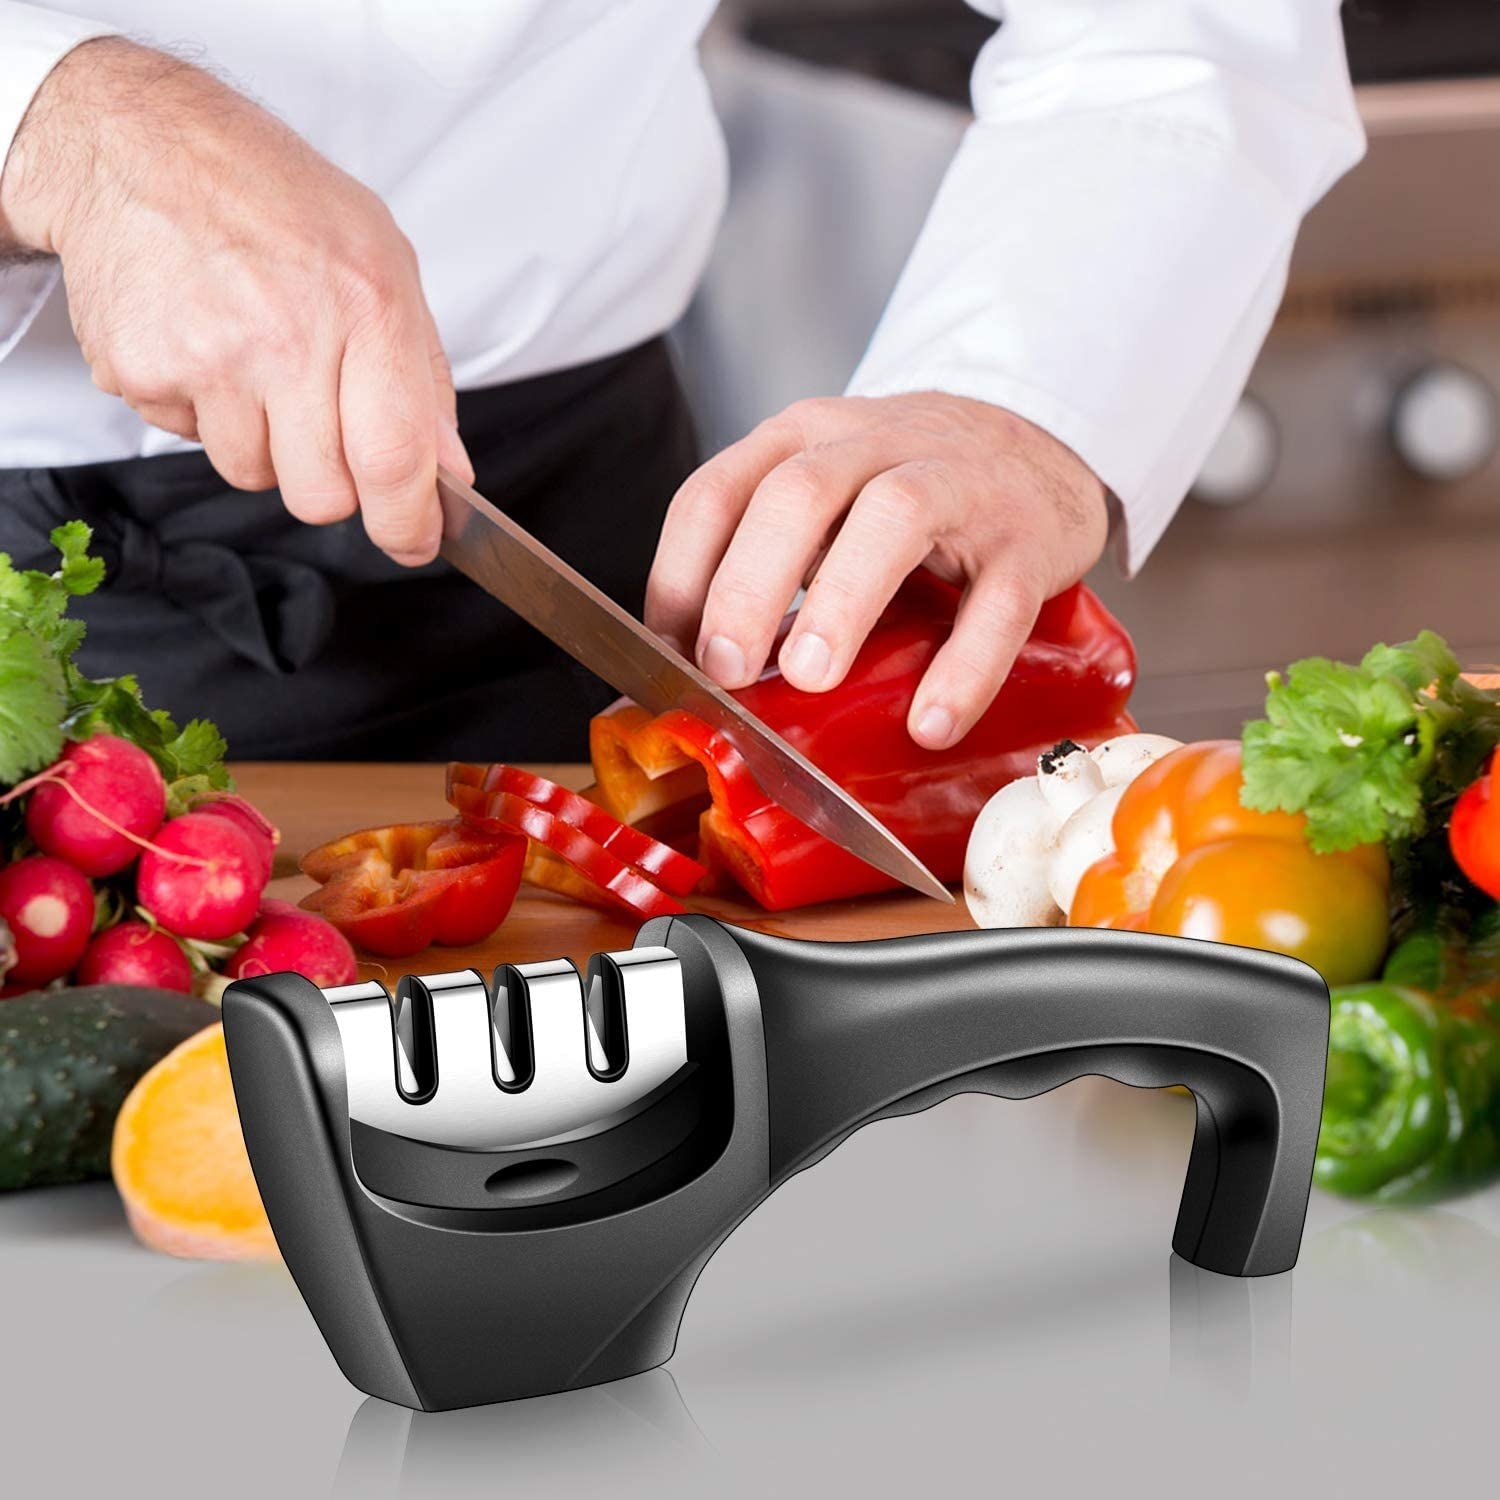 A person chopping up a capsicum with a knife sharpener near it